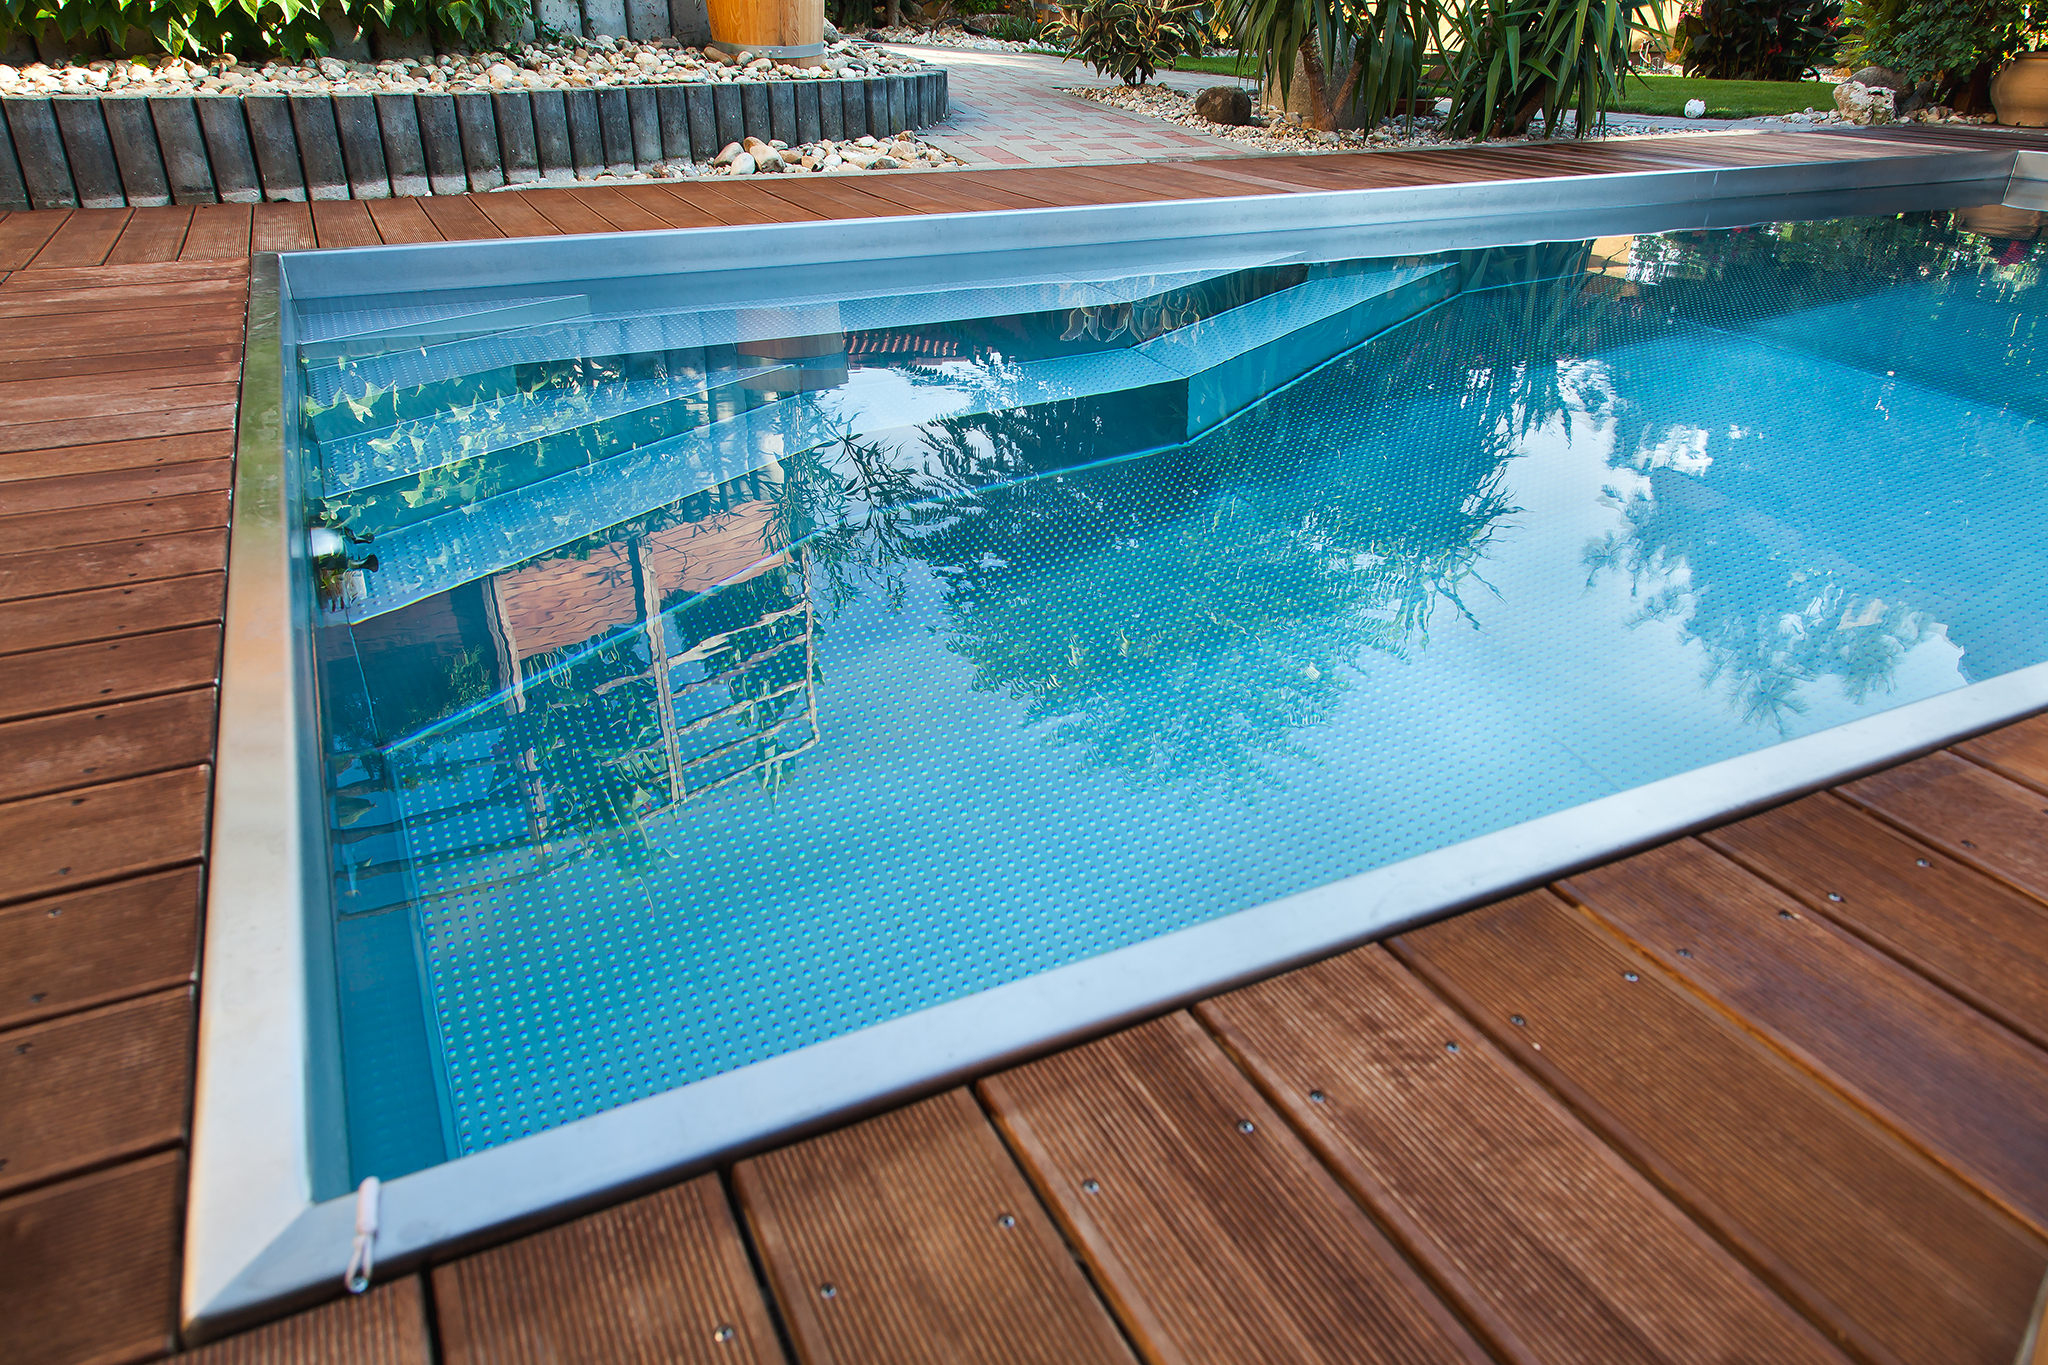 Stainless steel garden pool with roller shutter cover